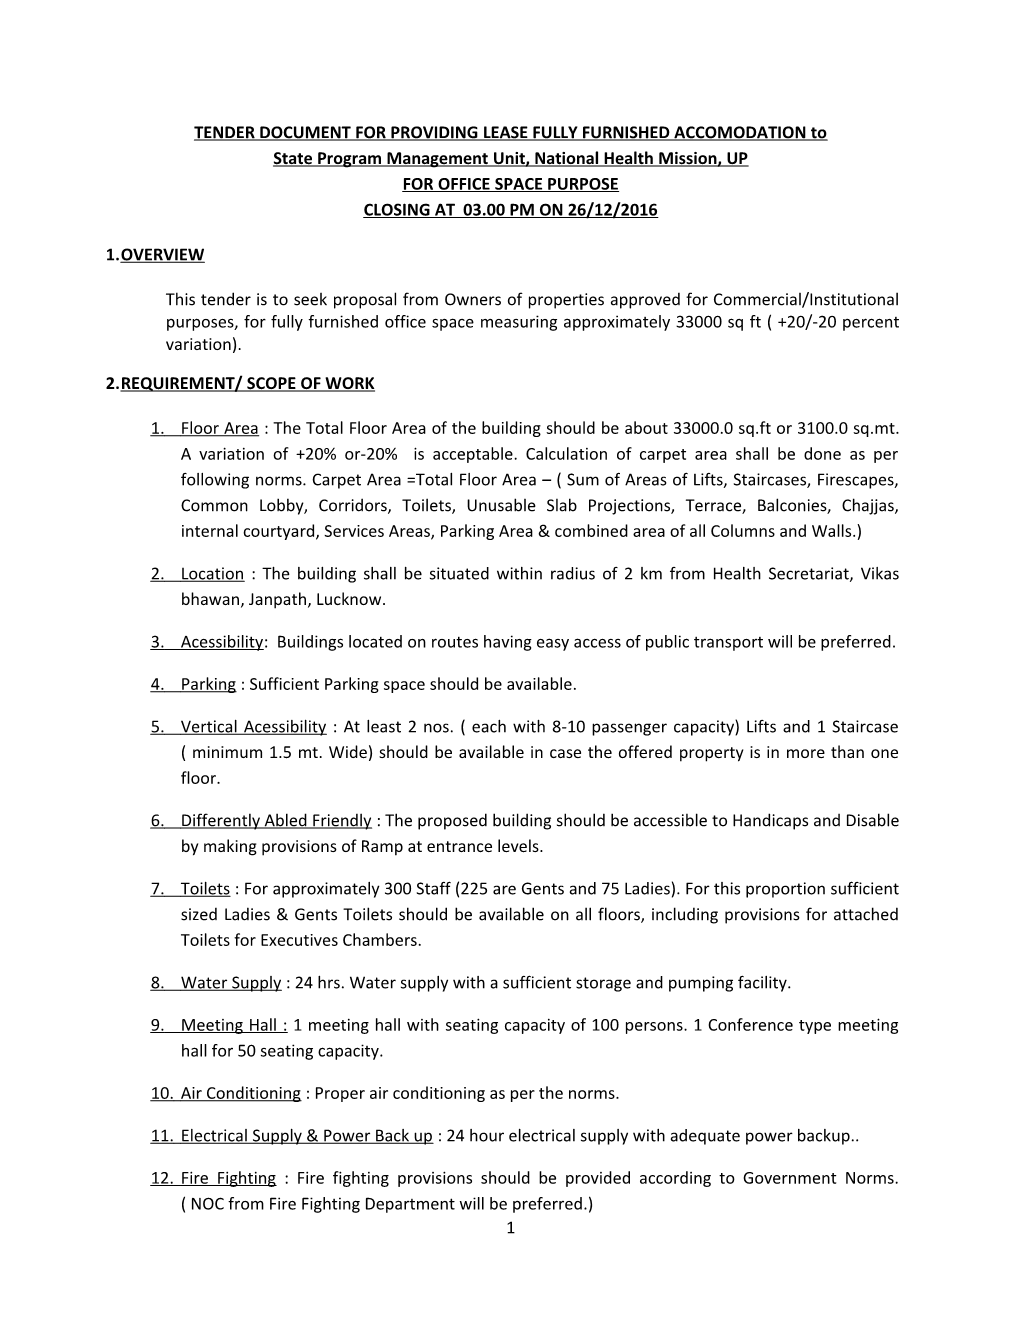 TENDER DOCUMENT for PROVIDING LEASE FULLY FURNISHED ACCOMODATION To